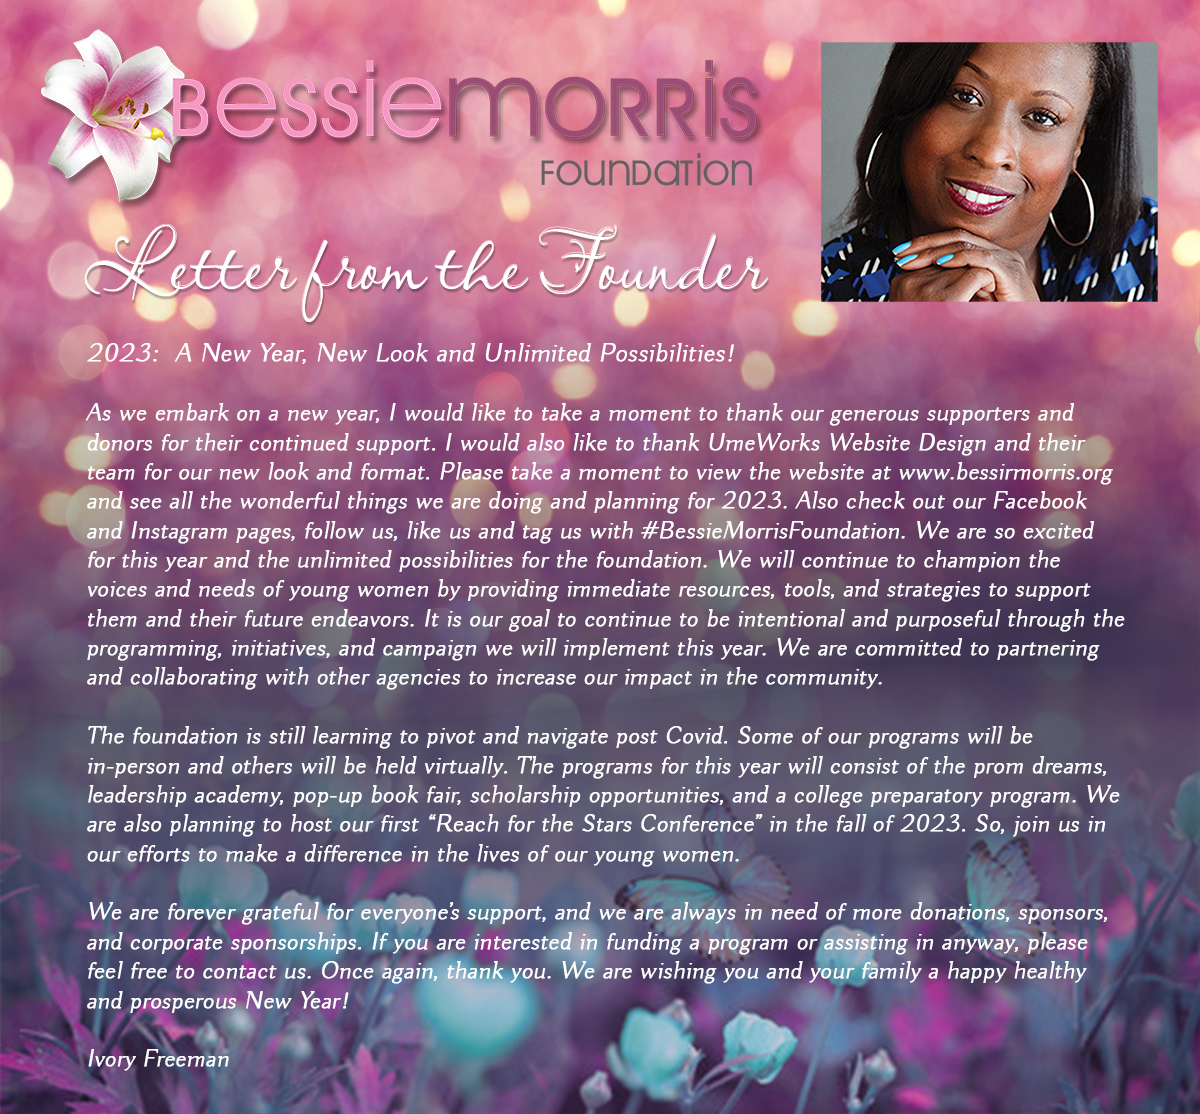 2022 letter from the founder of Bessie Morris Foundation